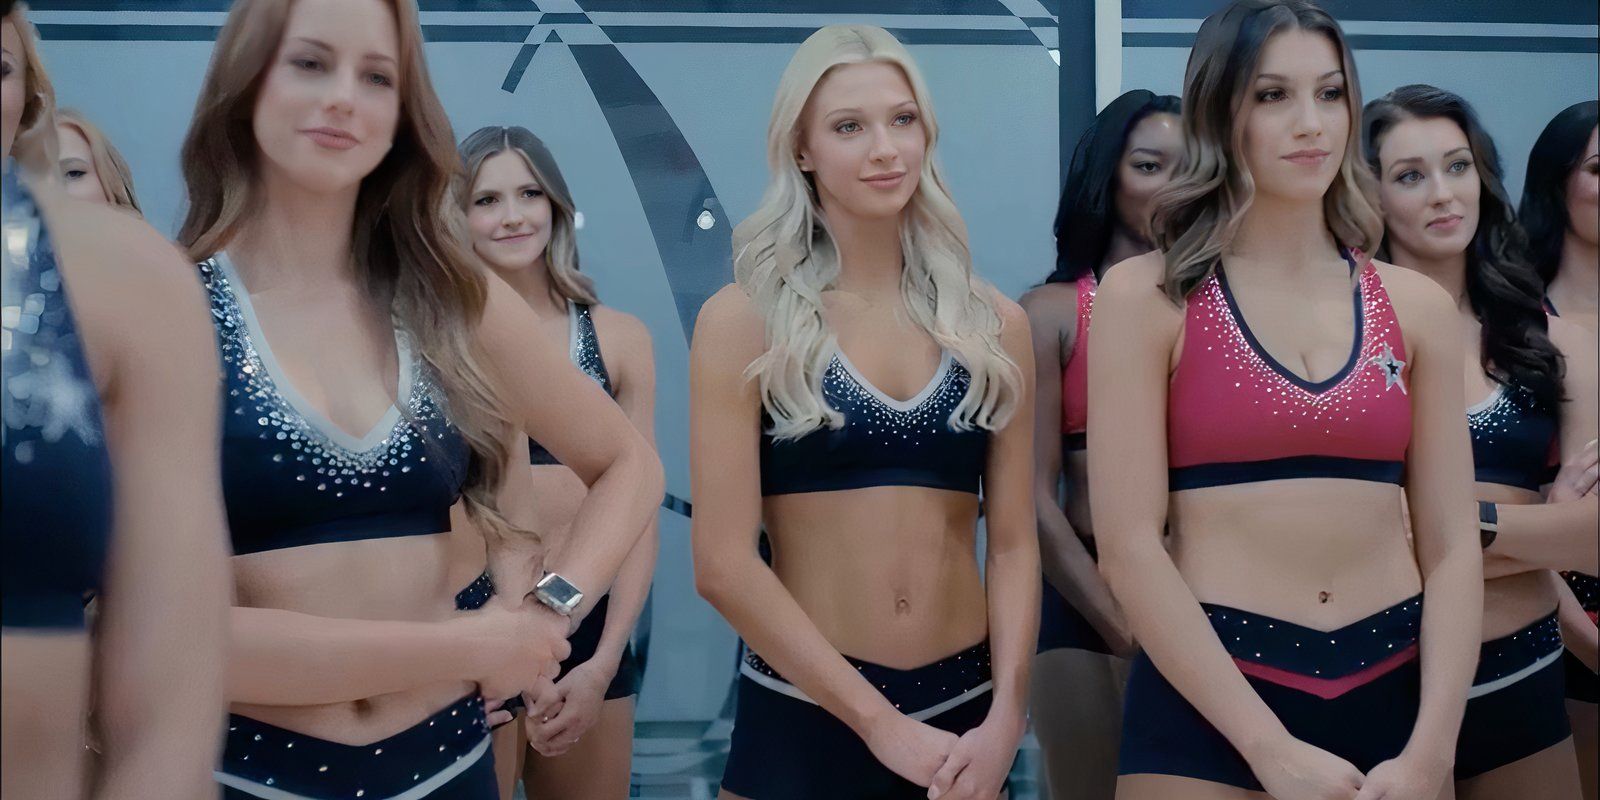 What Happened To Madeline Salter After Americas Sweethearts: Dallas Cowboys Cheerleaders?